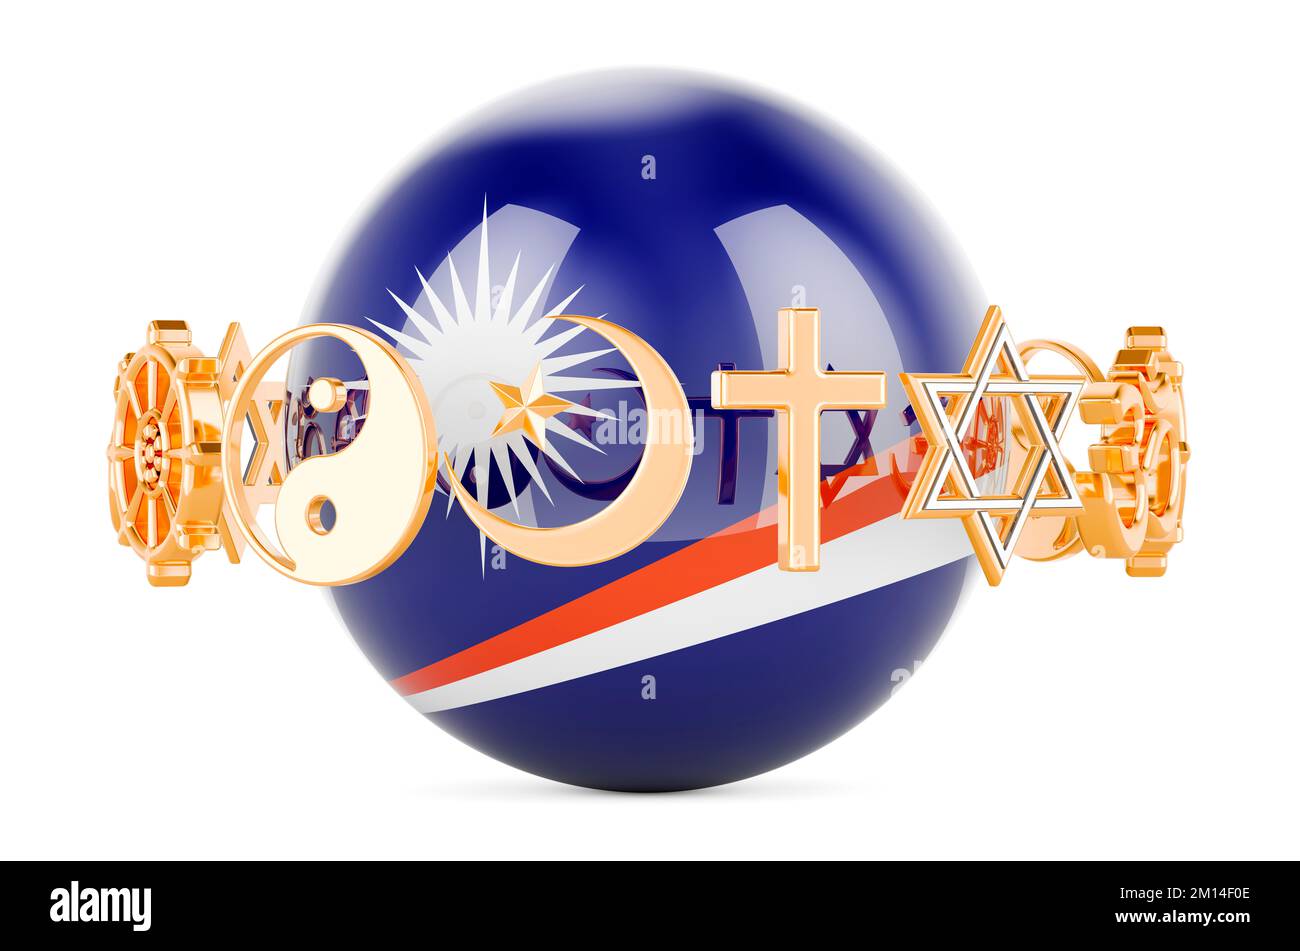 Marshallese flag painted on sphere with religions symbols around, 3D rendering isolated on white background Stock Photo